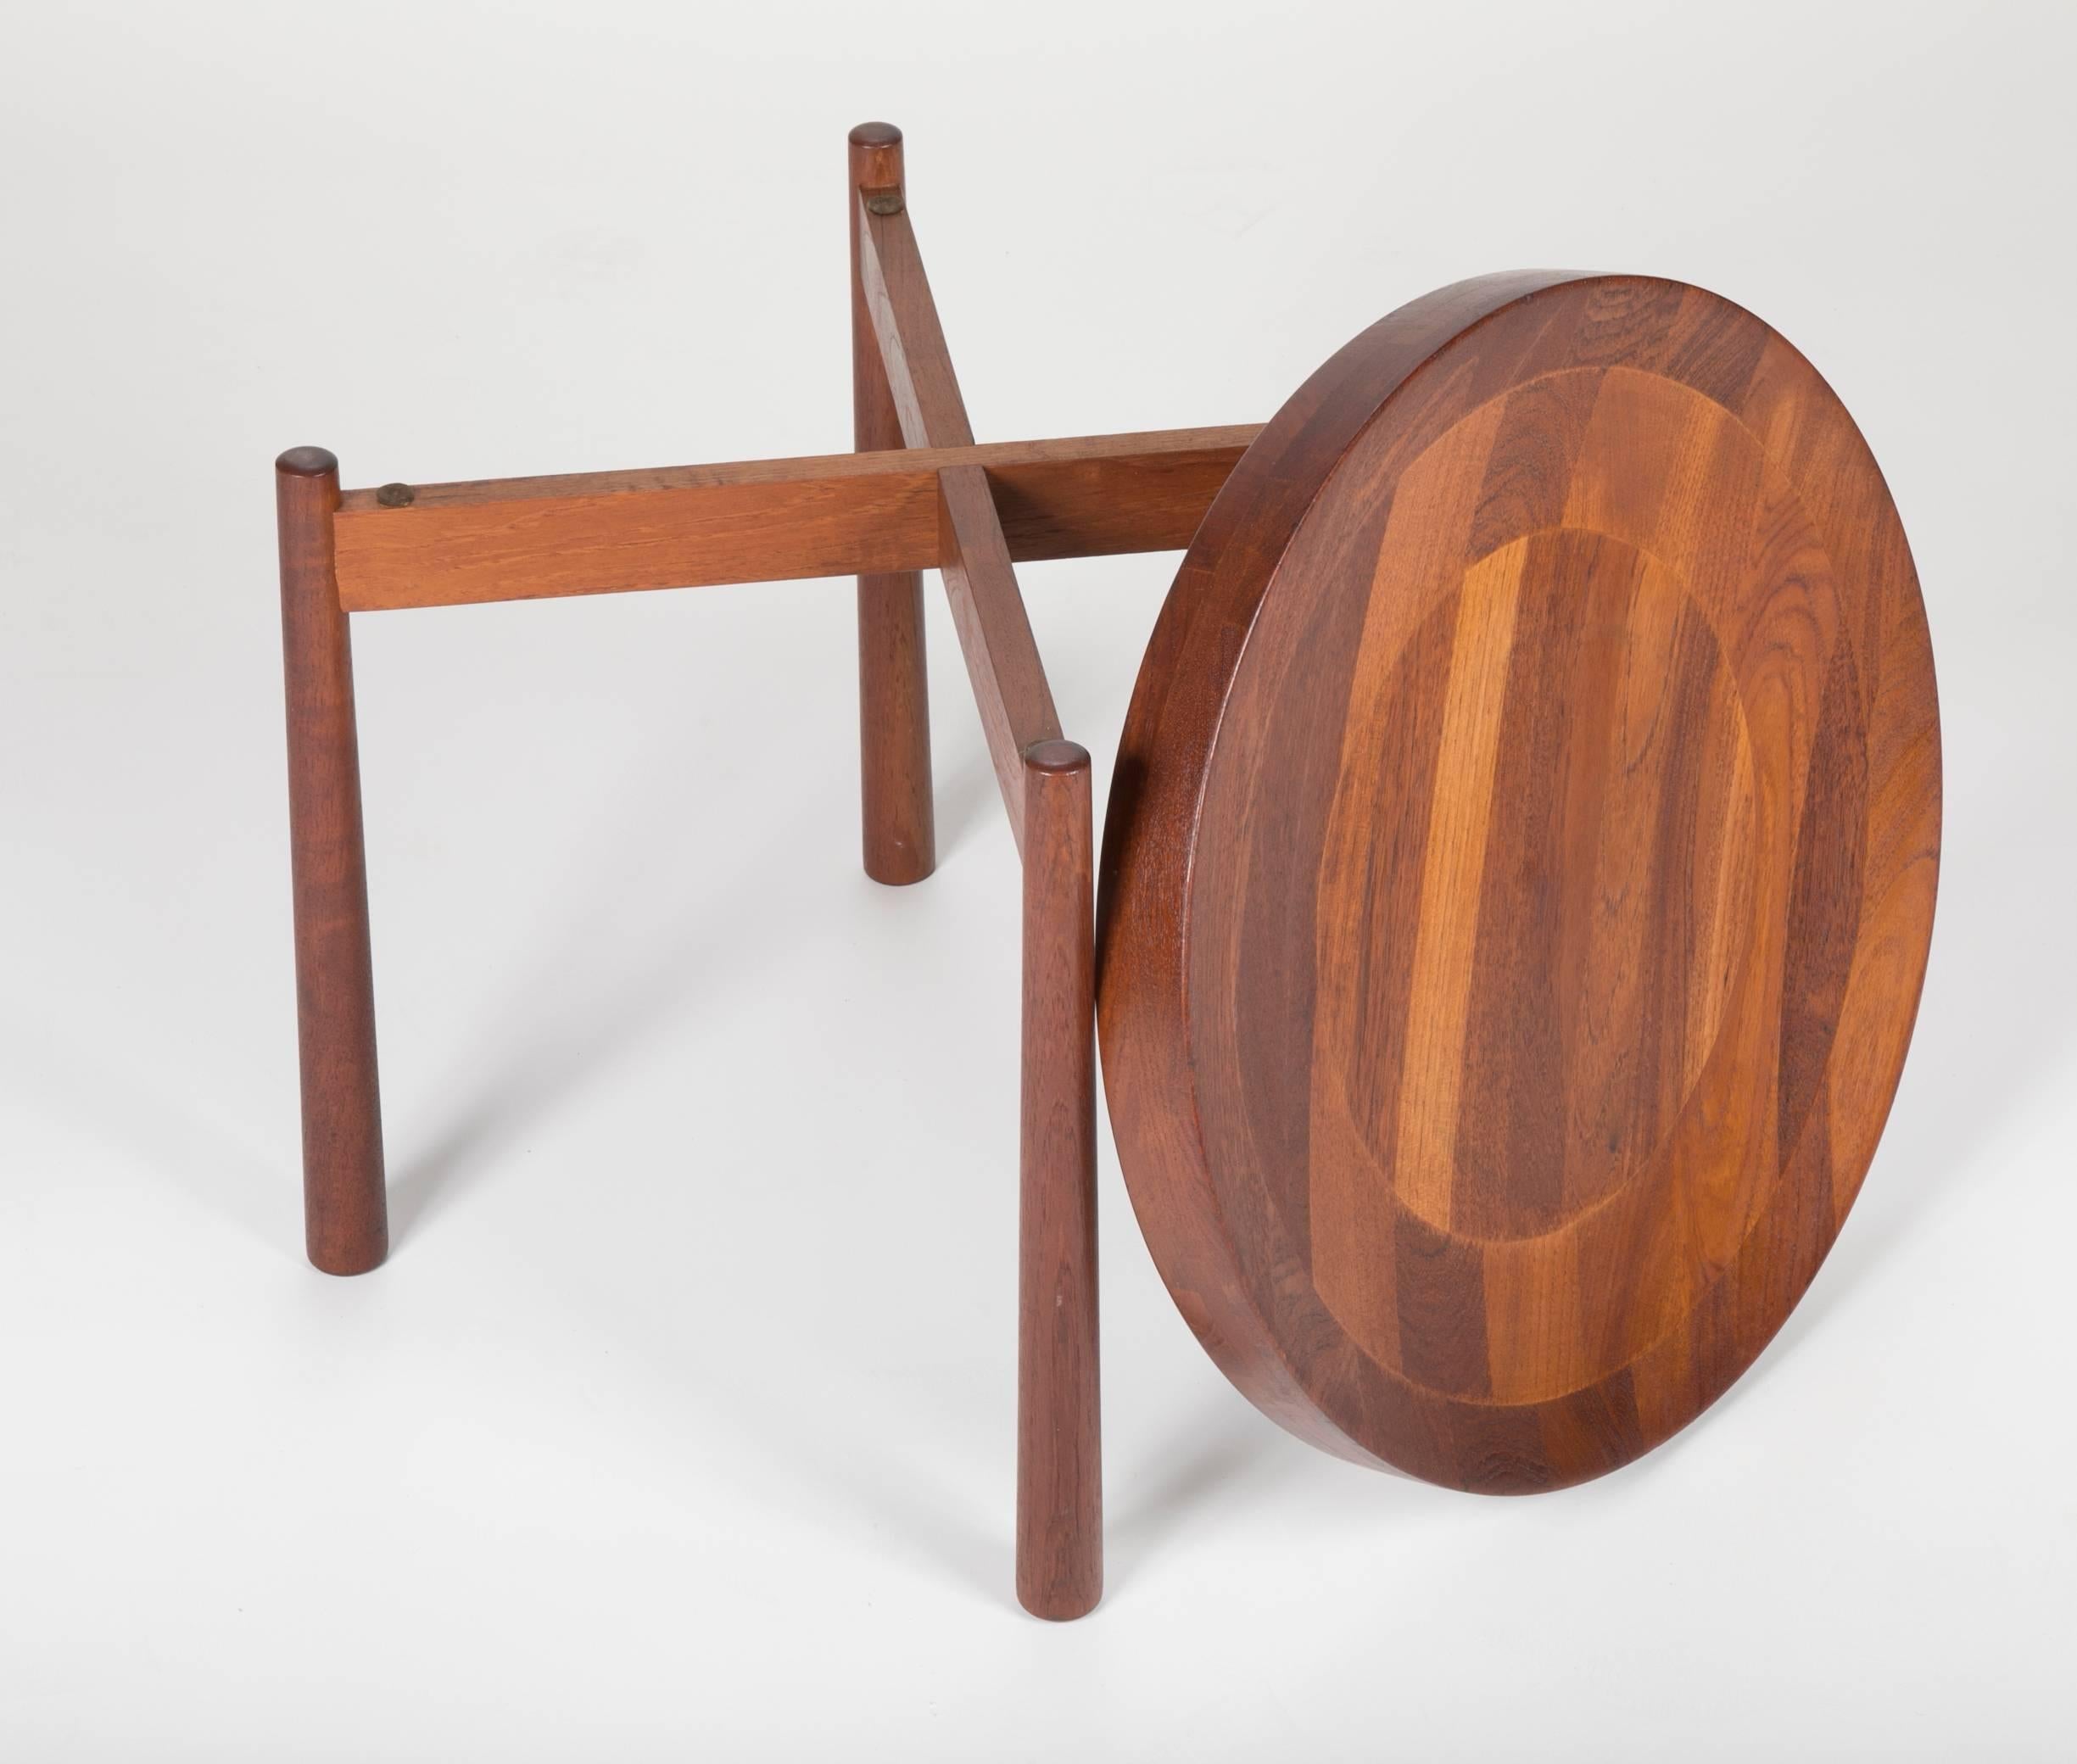 Pair of Midcentury Teak Side Tables, style of  Jens Quistgaard for DUX 2